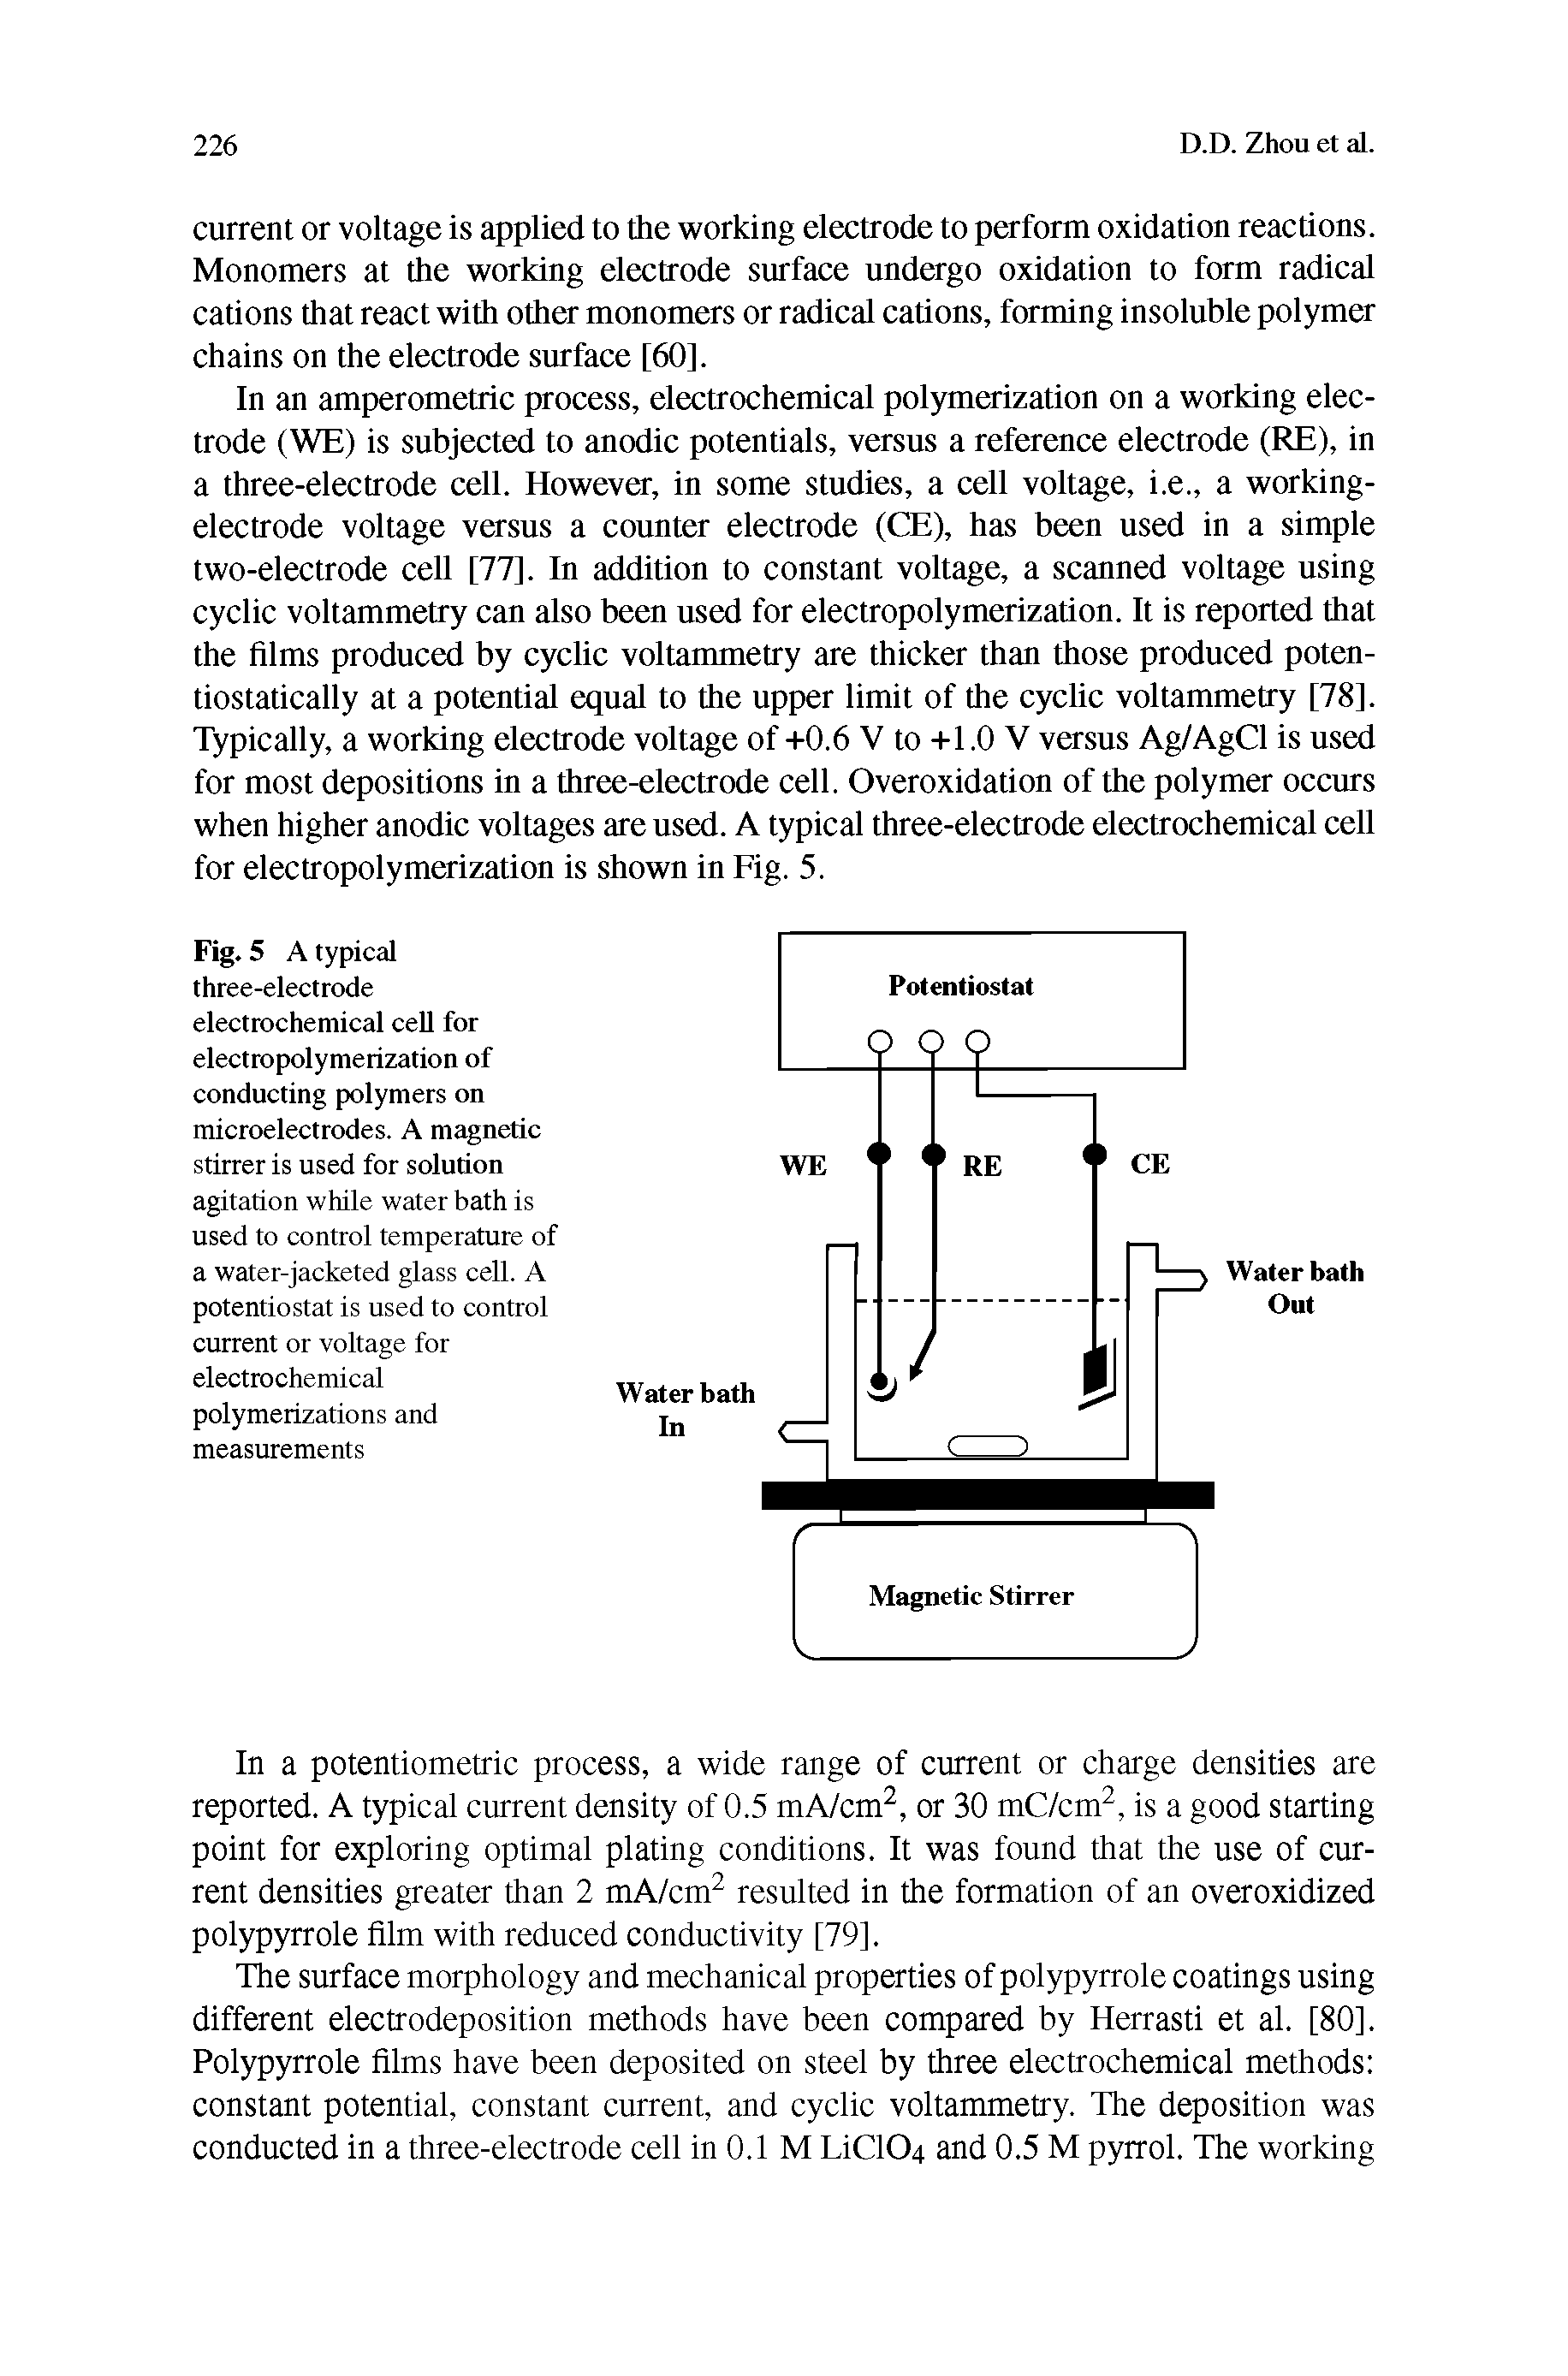 Fig. 5 A typical three-electrode electrochemical cell for electropolymerization of conducting polymers on microelectrodes. A magnetic stirrer is used for solution agitation while water bath is used to control temperature of a water-jacketed glass cell. A potentiostat is used to control current or voltage for electrochemical polymerizations and measurements...